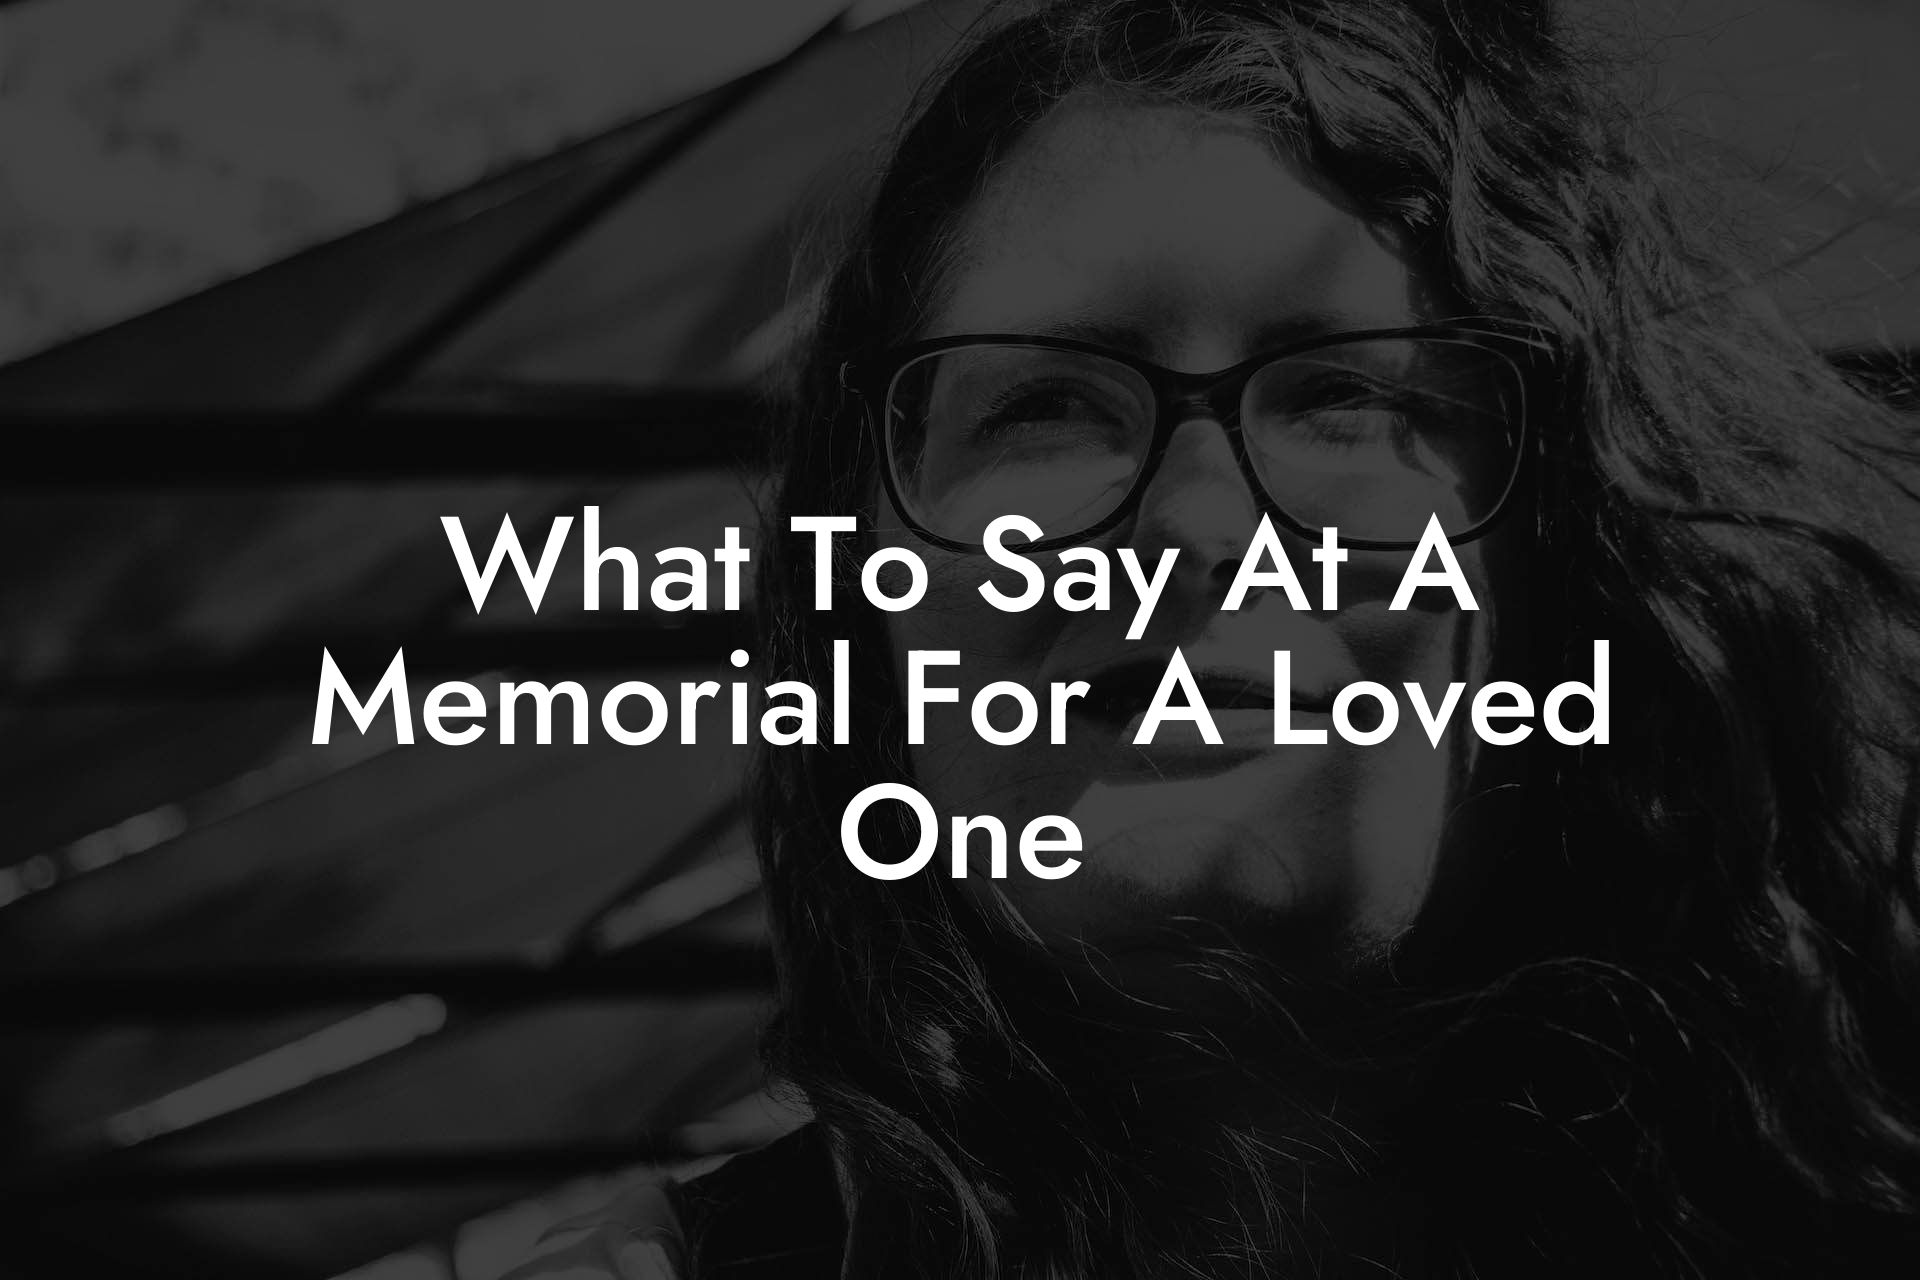 What To Say At A Memorial For A Loved One